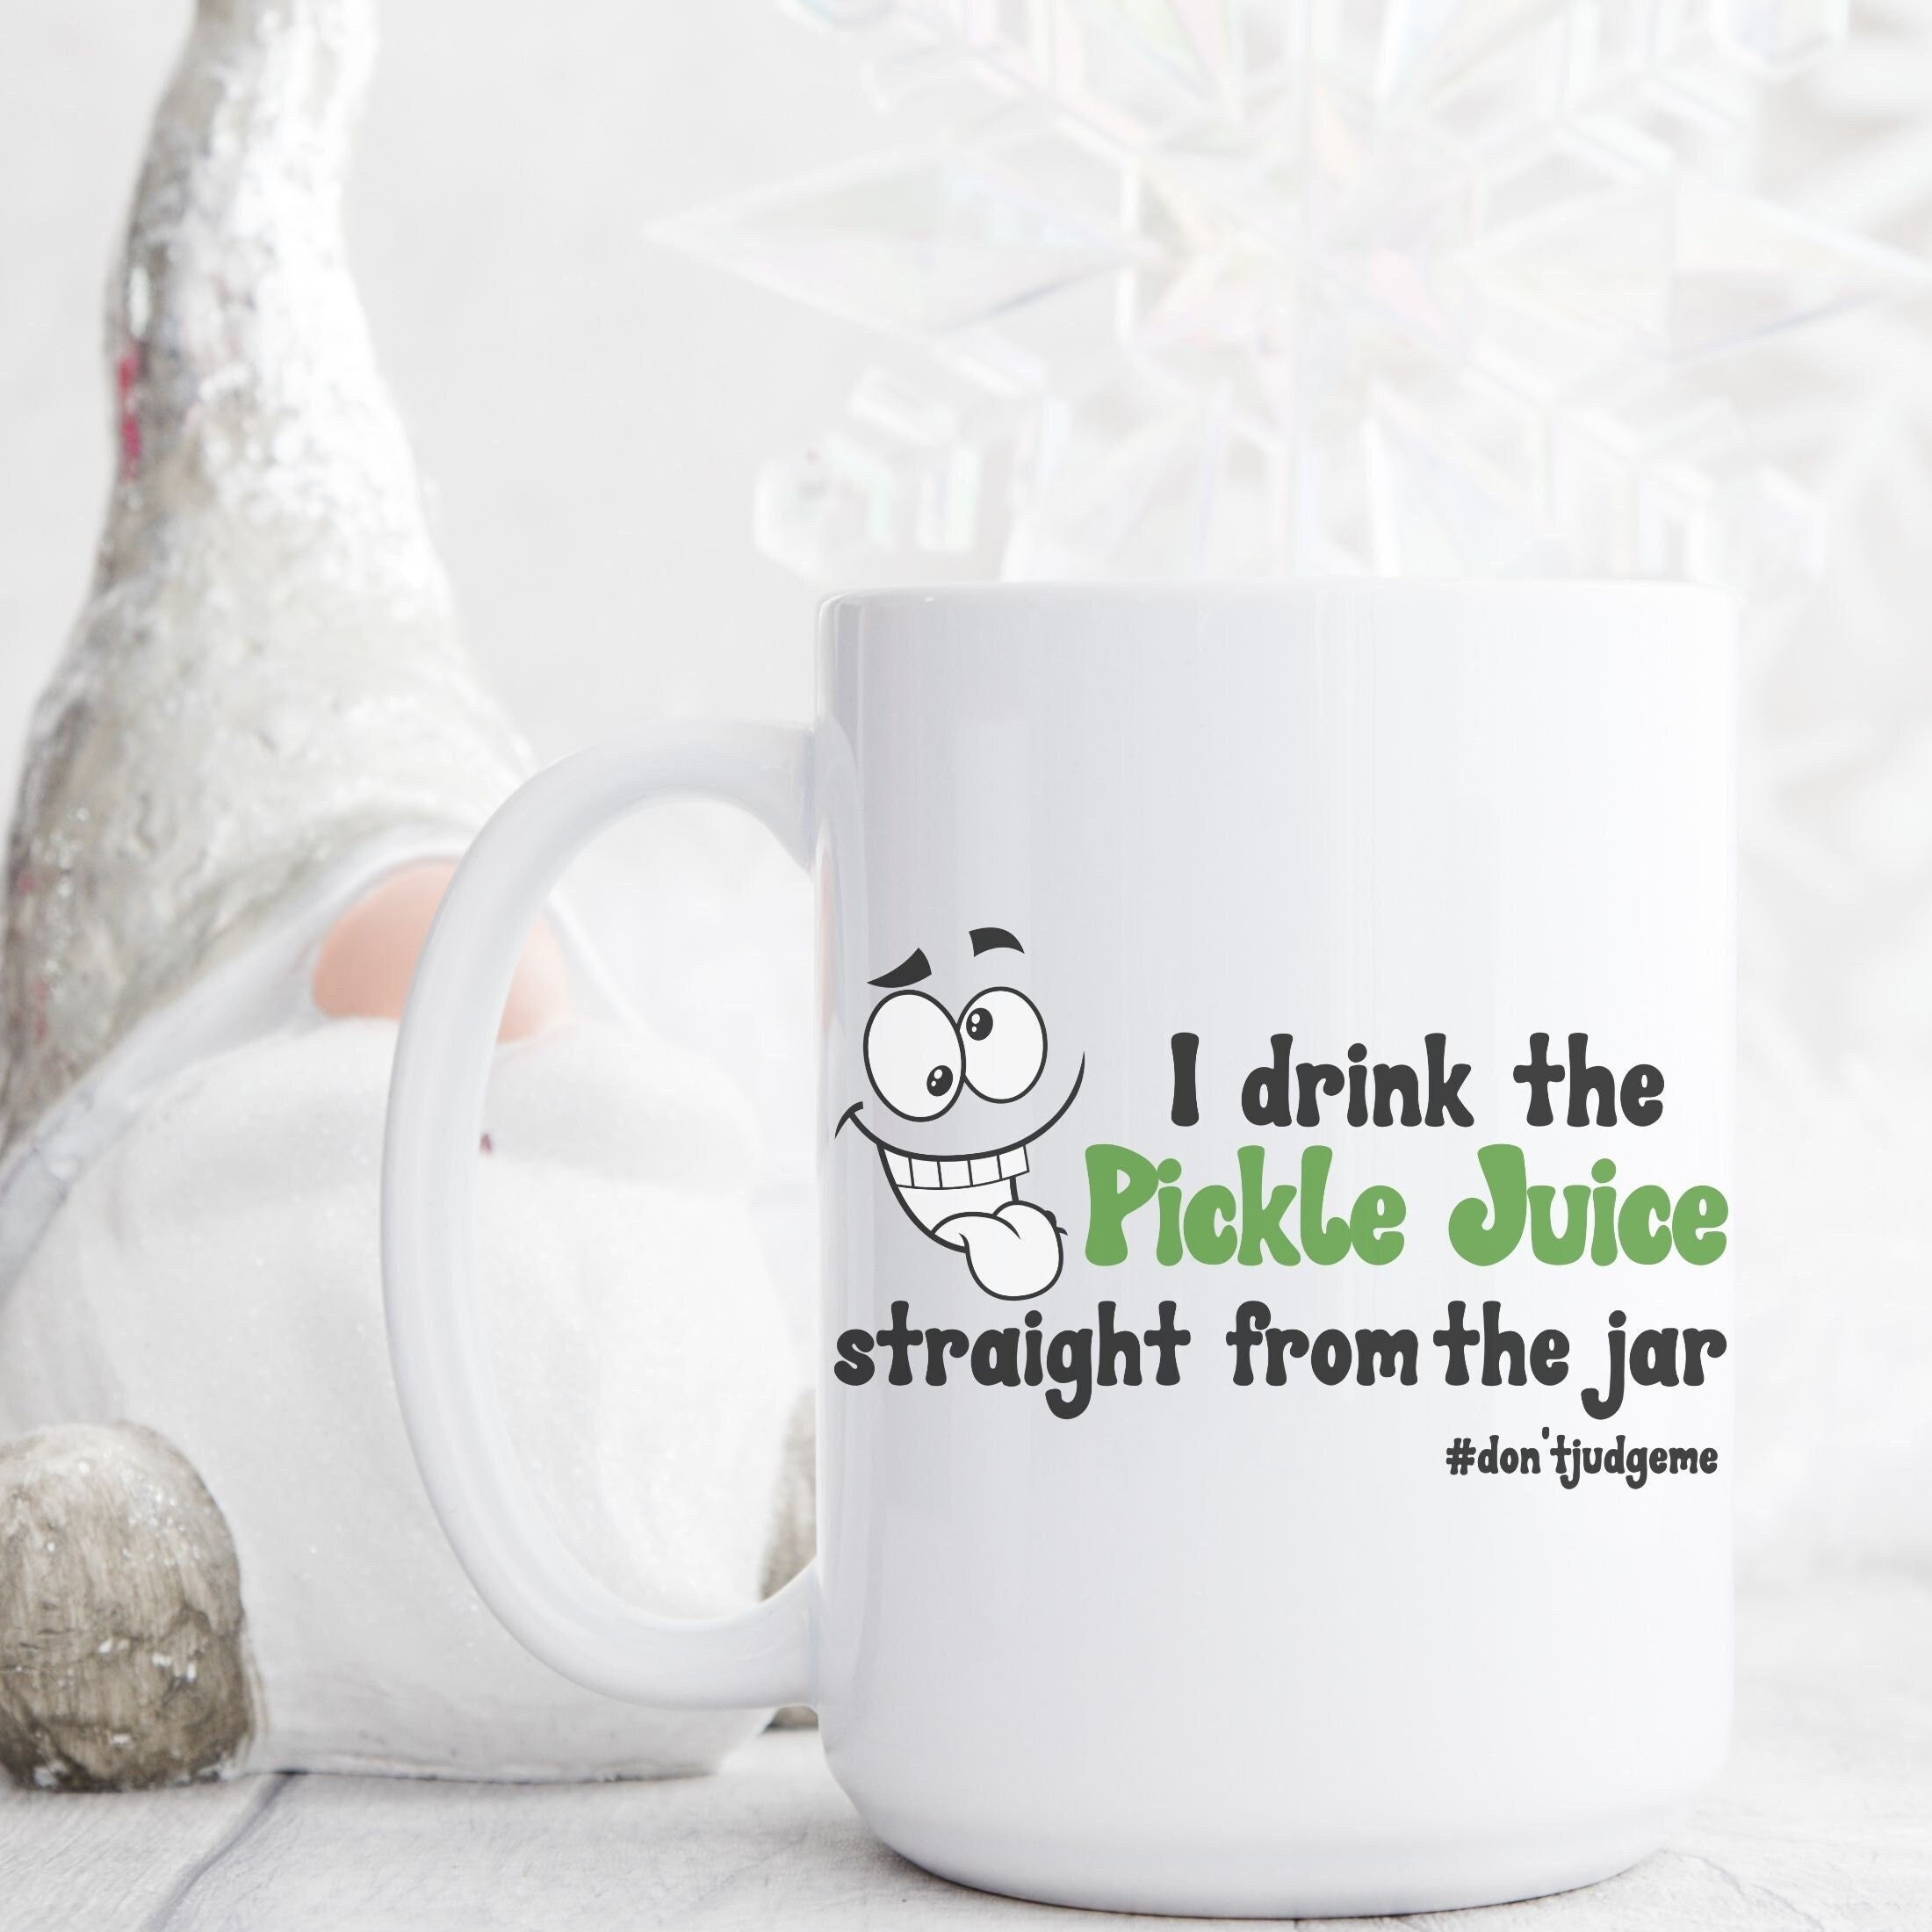 Pickle Mug, Funny Pickle Cup, Pickles, Pickle Gifts, Pickle Lover Gift,  Gift Exchange Idea 